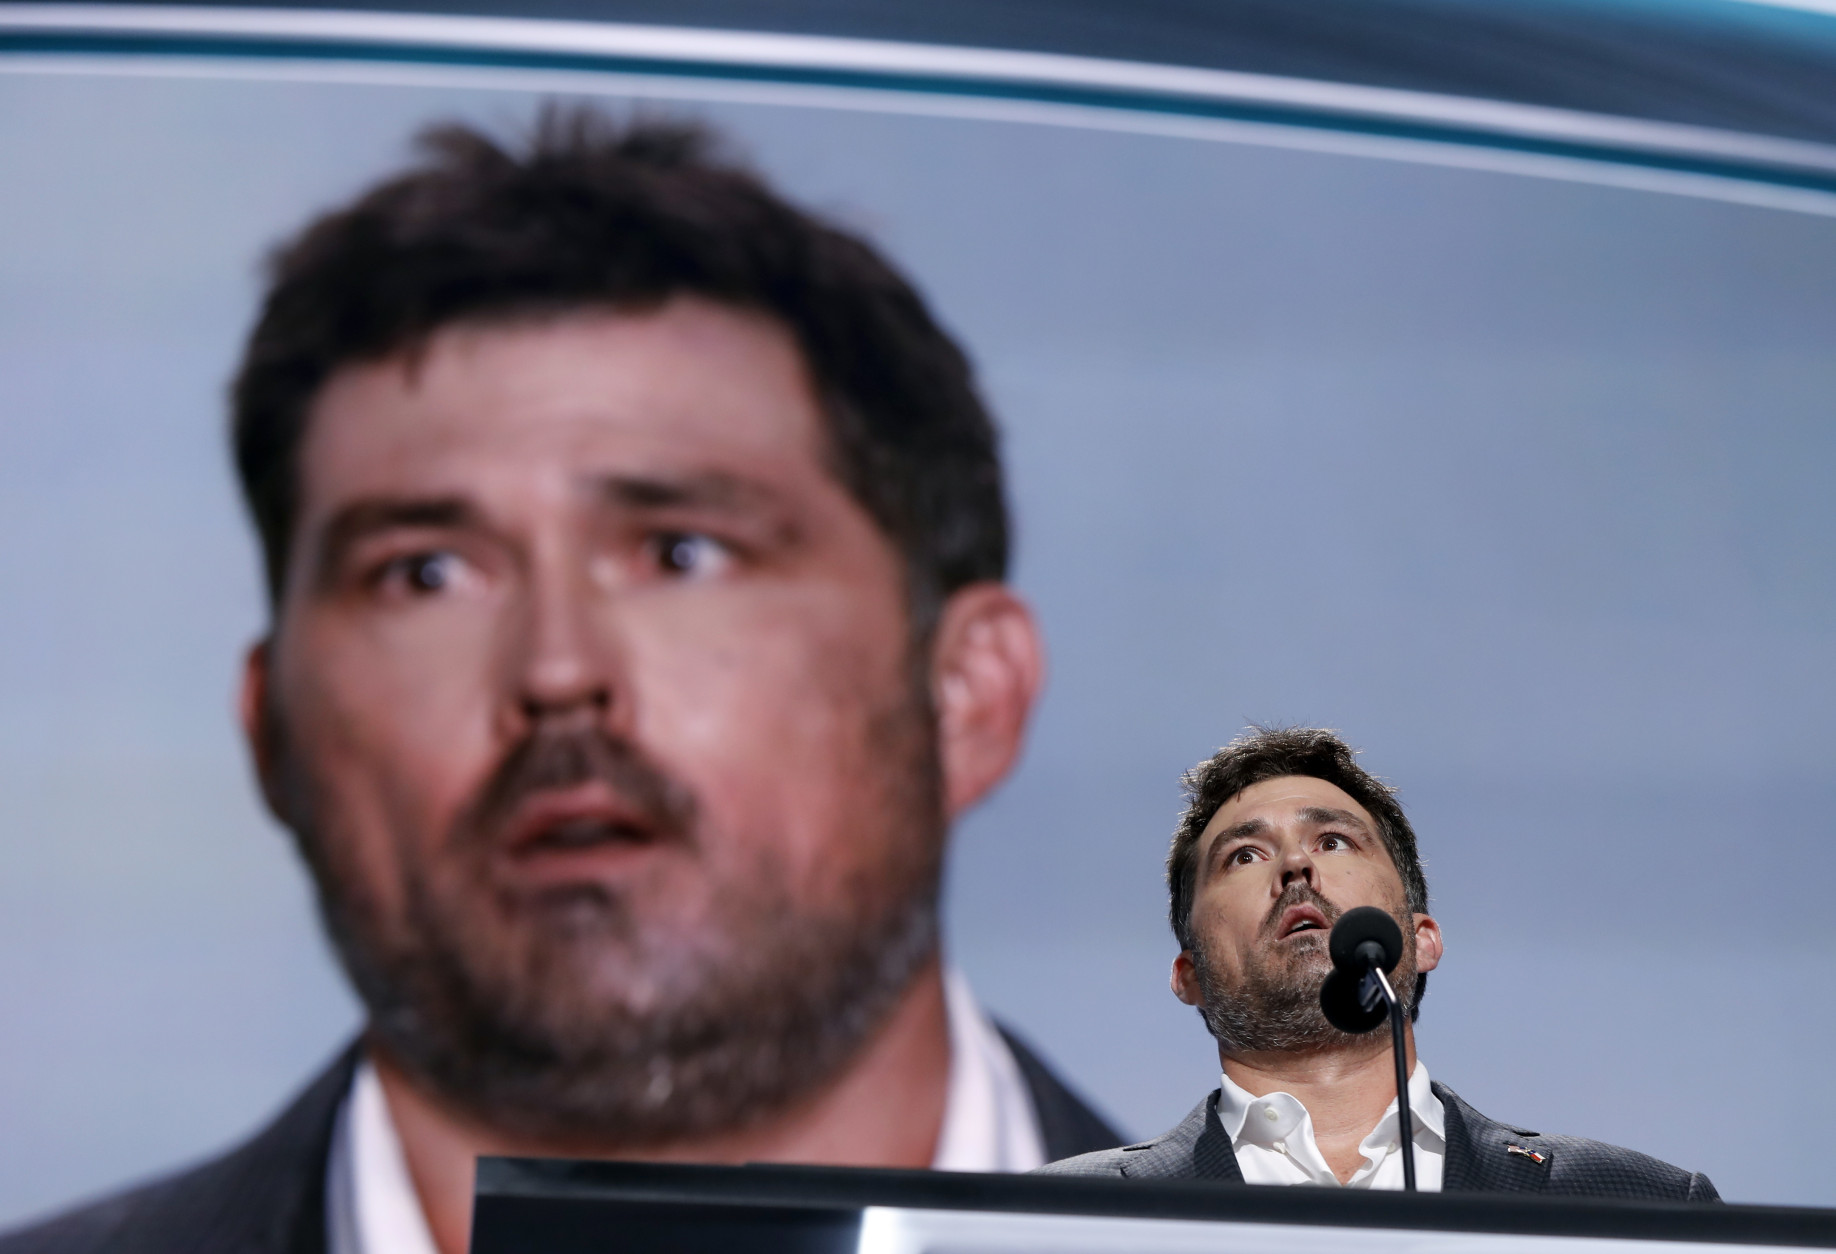 Retired U.S. Navy Seal Marcus Luttrell addresses delegates during the opening day of the Republican National Convention in Cleveland, Monday, July 18, 2016. (AP Photo/Carolyn Kaster)